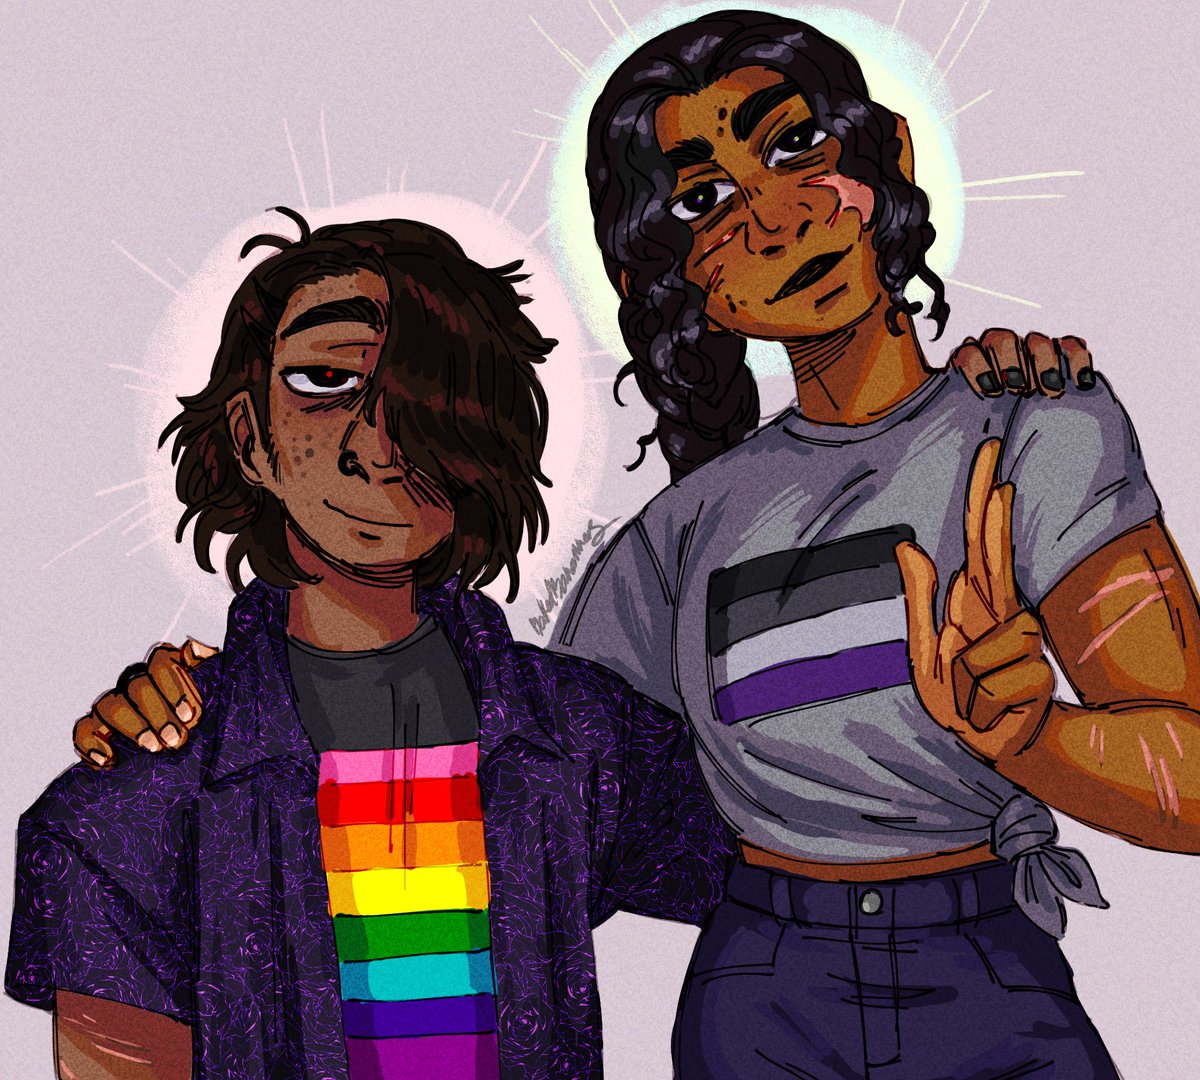 76. Nico and Reyna on their way to Pride together. #pjo. 